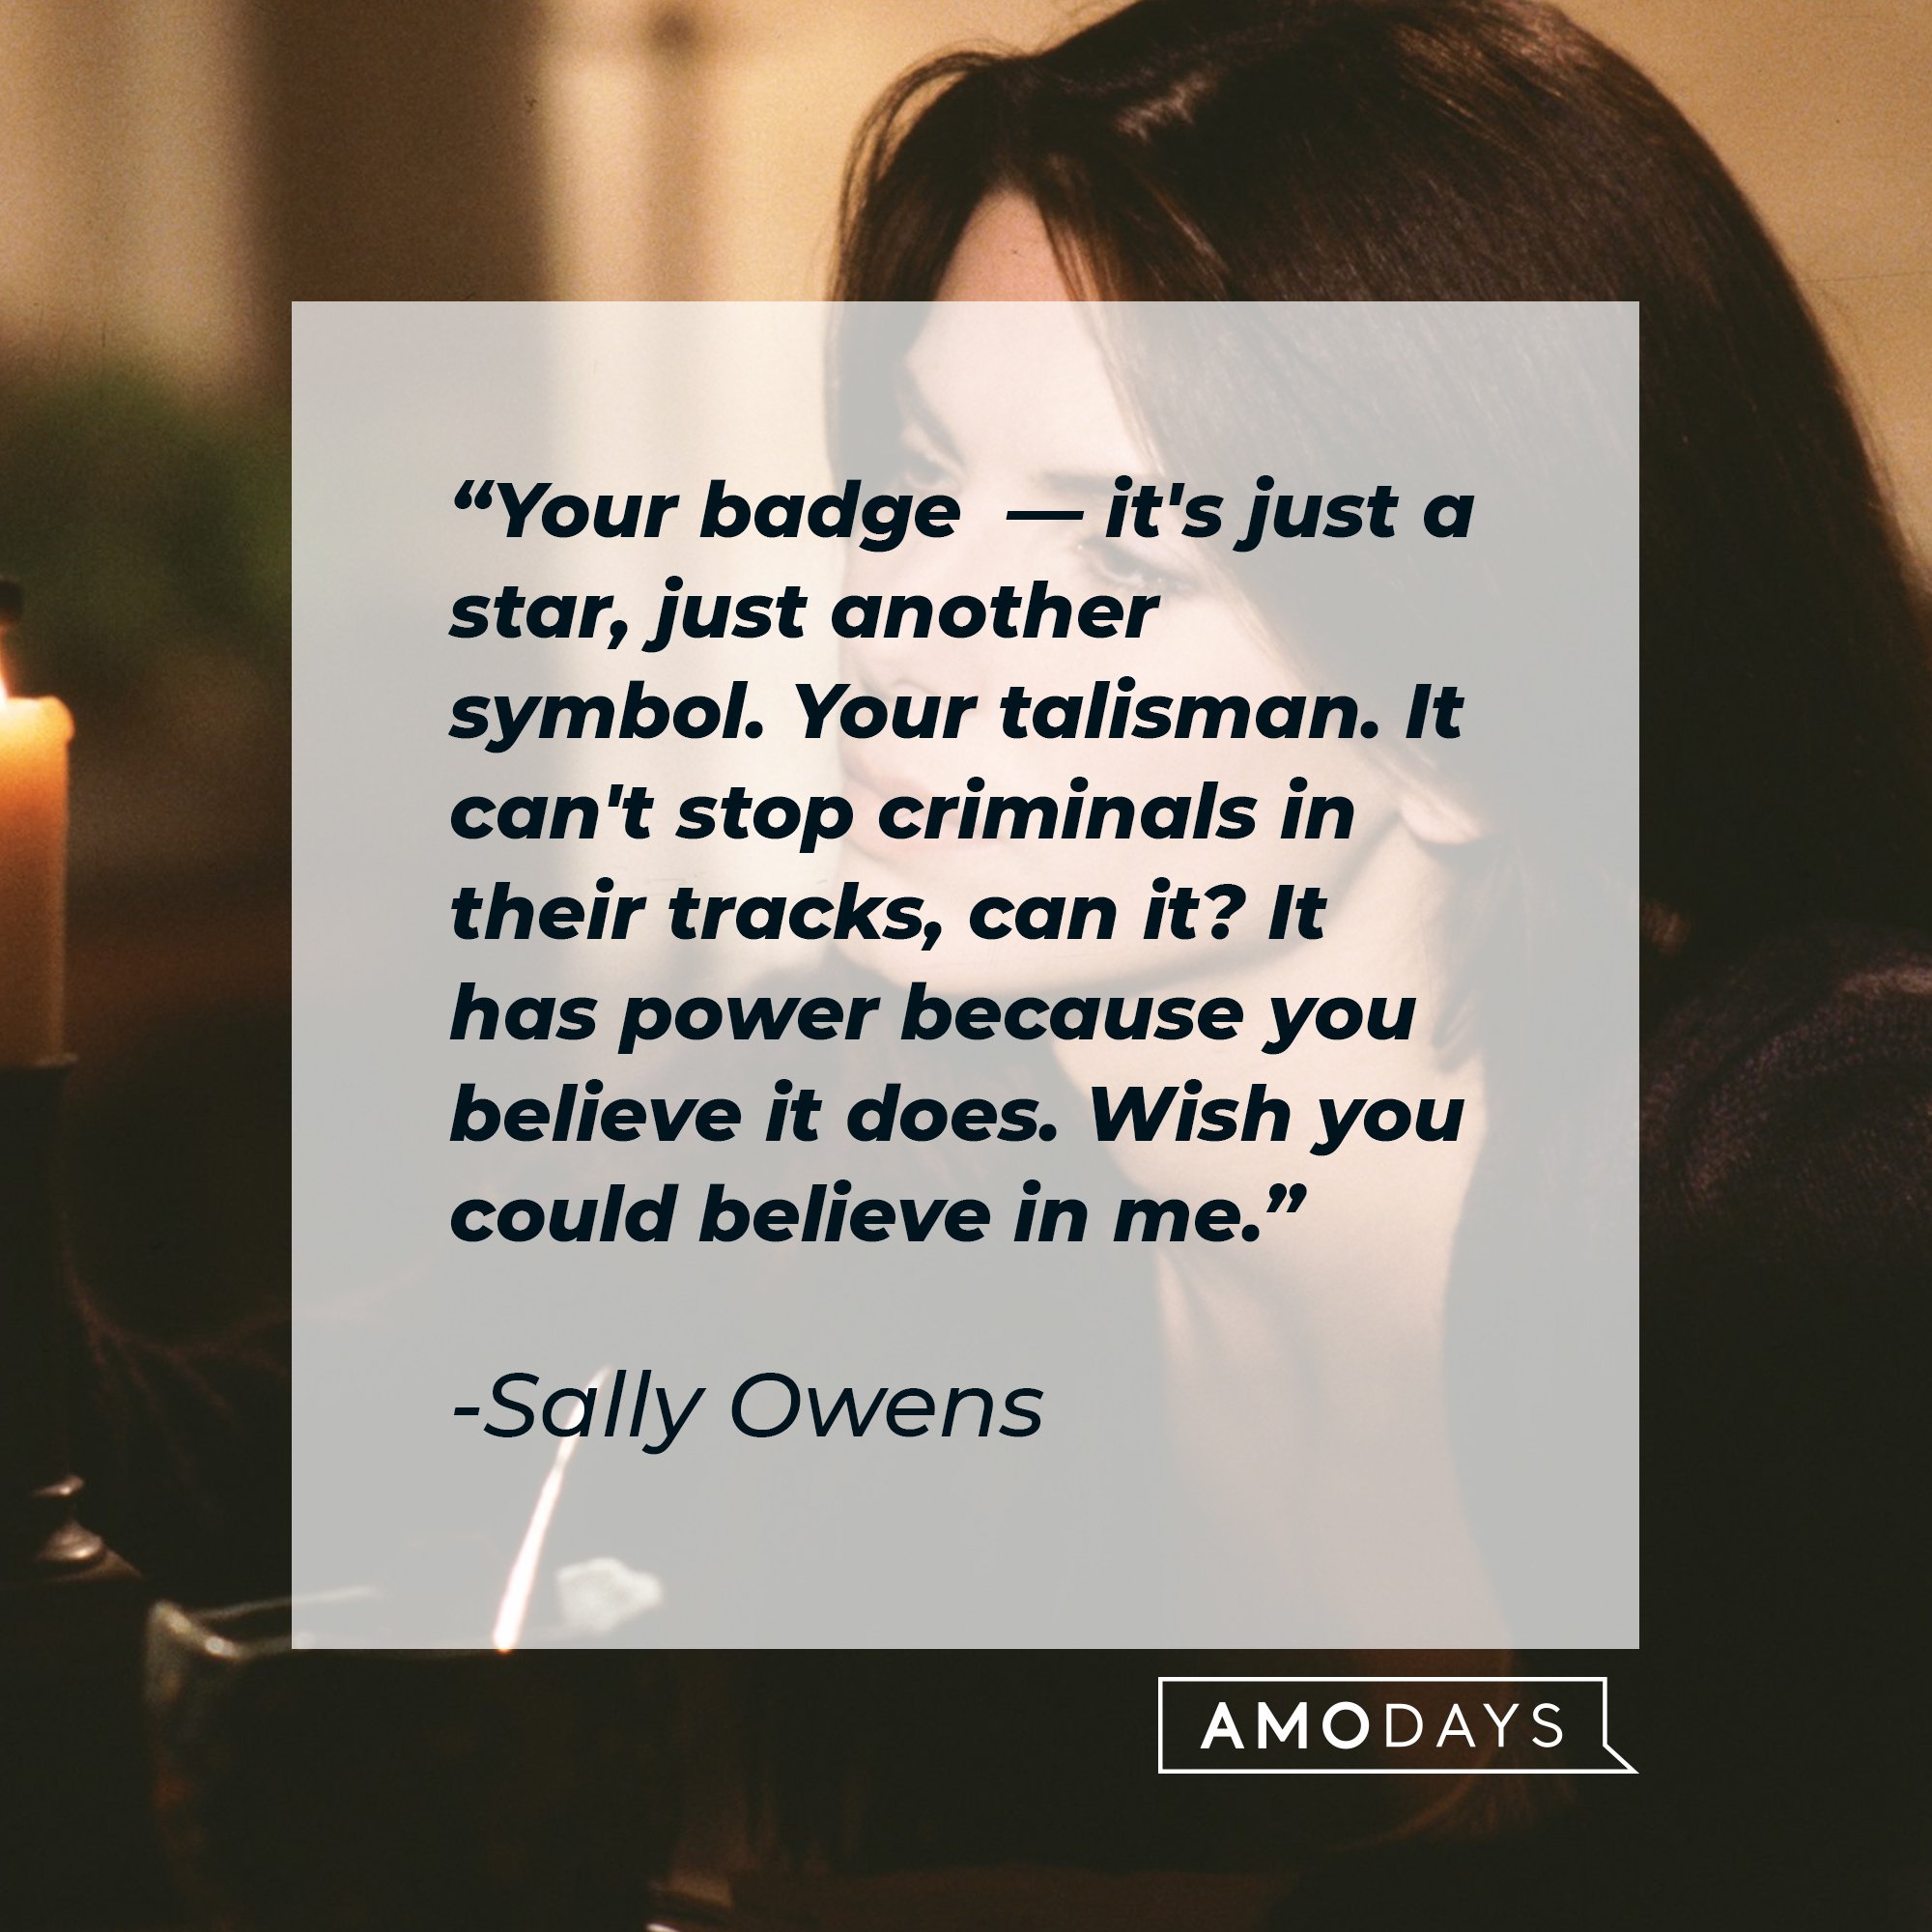 Sally Owens' quote: "Your badge  — it's just a star, just another symbol. Your talisman. It can't stop criminals in their tracks, can it? It has power because you believe it does. Wish you could believe in me." | Image: AmoDays